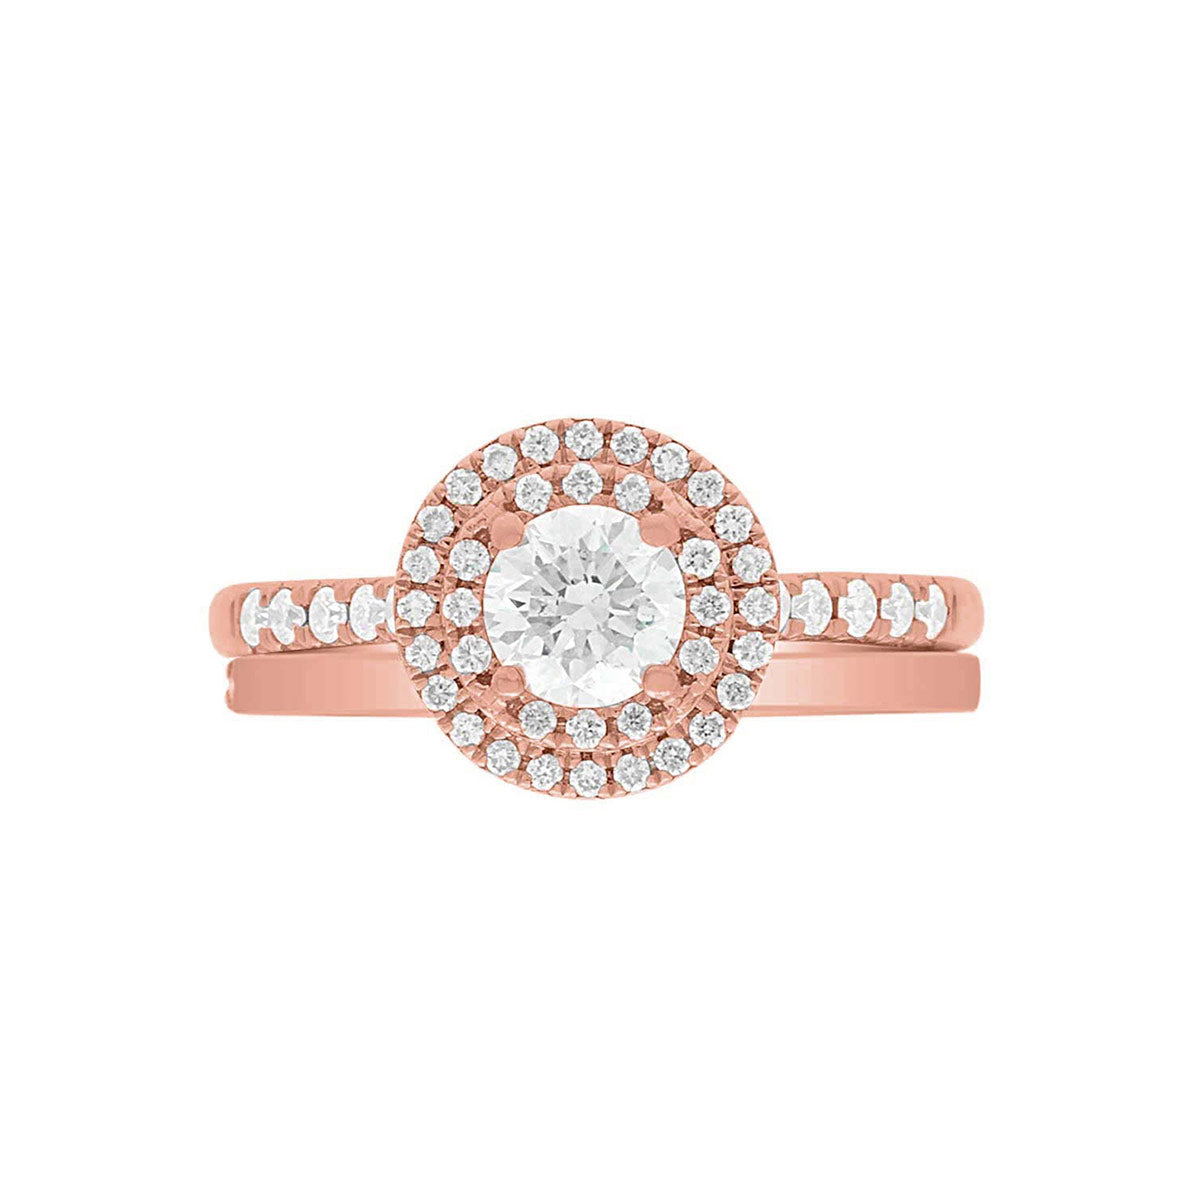 Round Double Halo Engagement Ring made of rose gold and diamonds, laying flat with a matching plain wedding ring